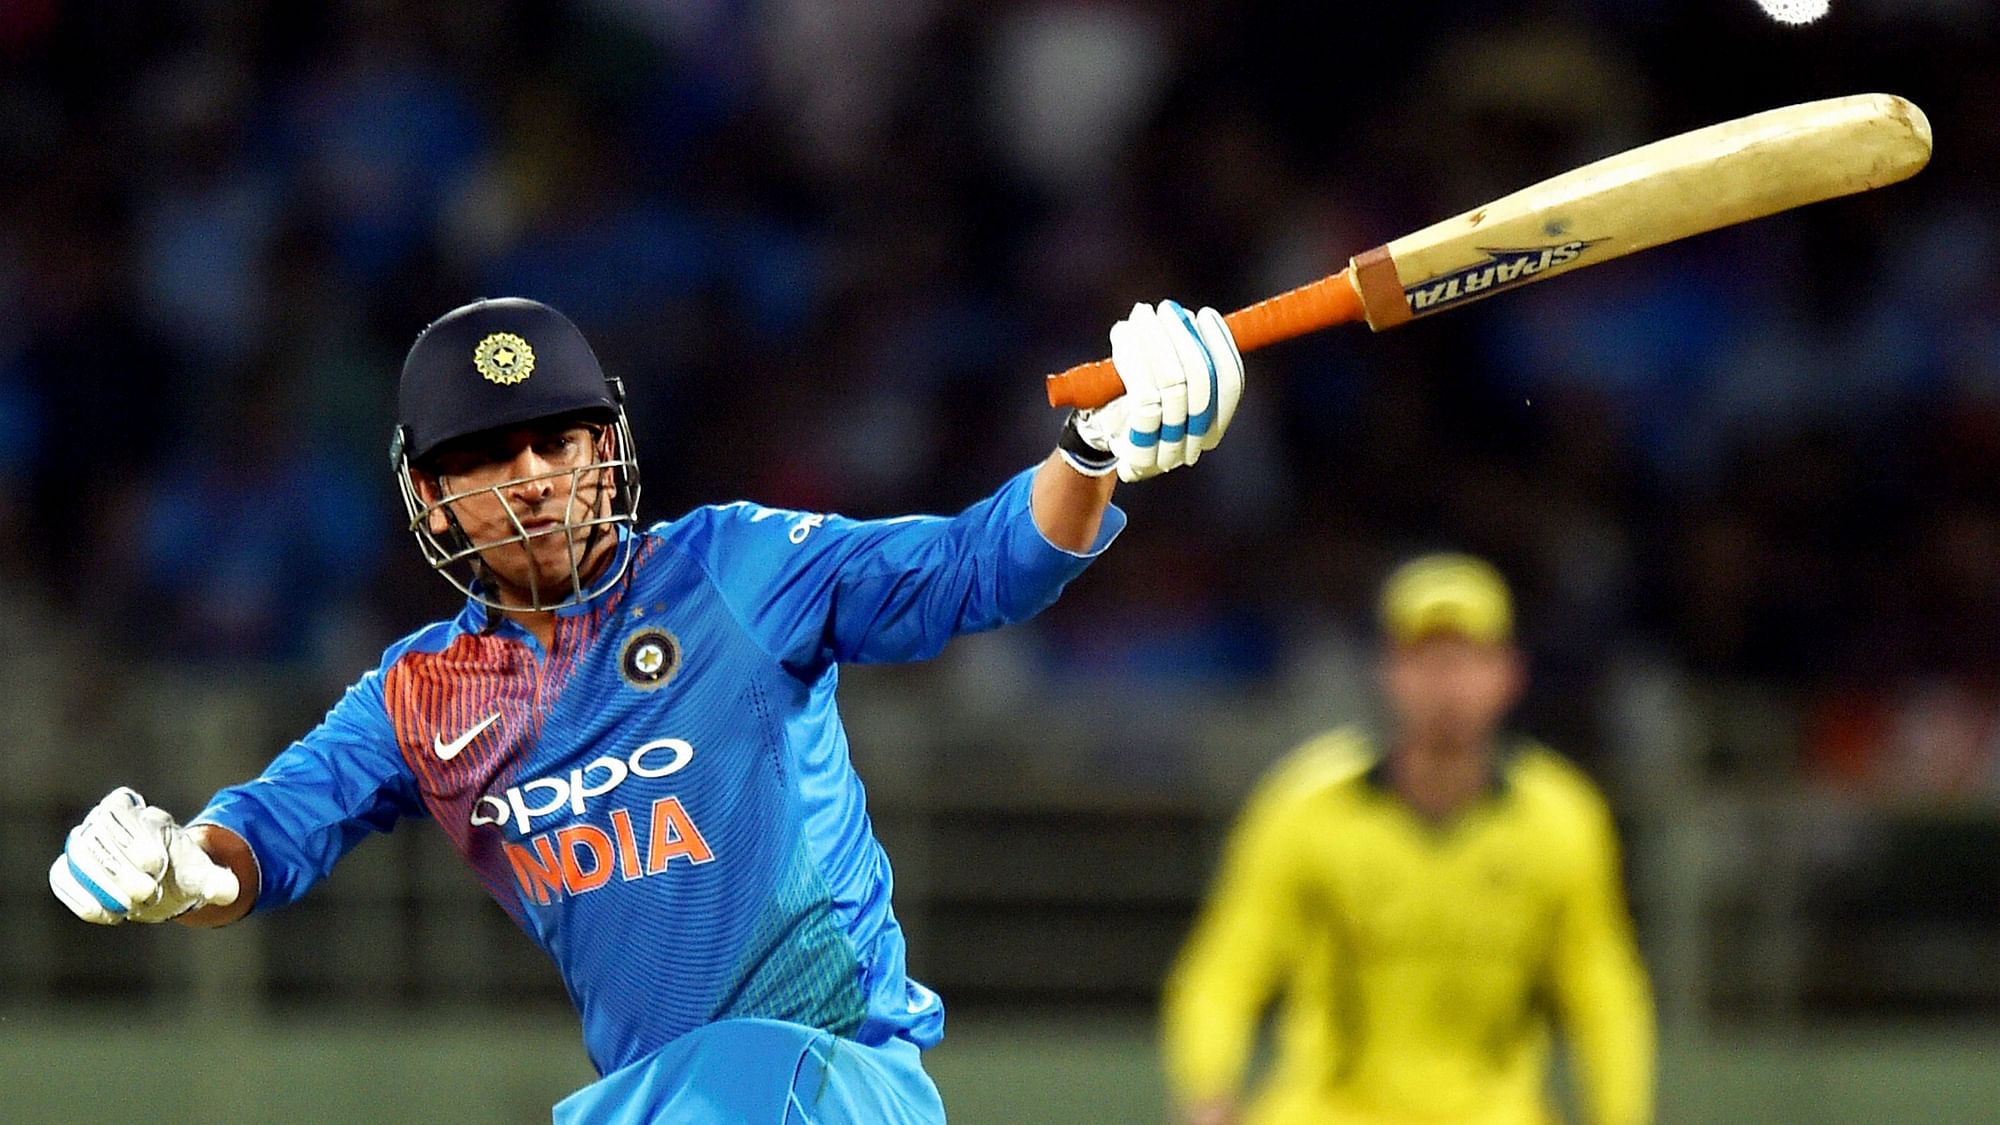 MS Dhoni scored 29 runs off 37 deliveries as India posted 126 in their 20 overs against Australia in the Vizag T20.